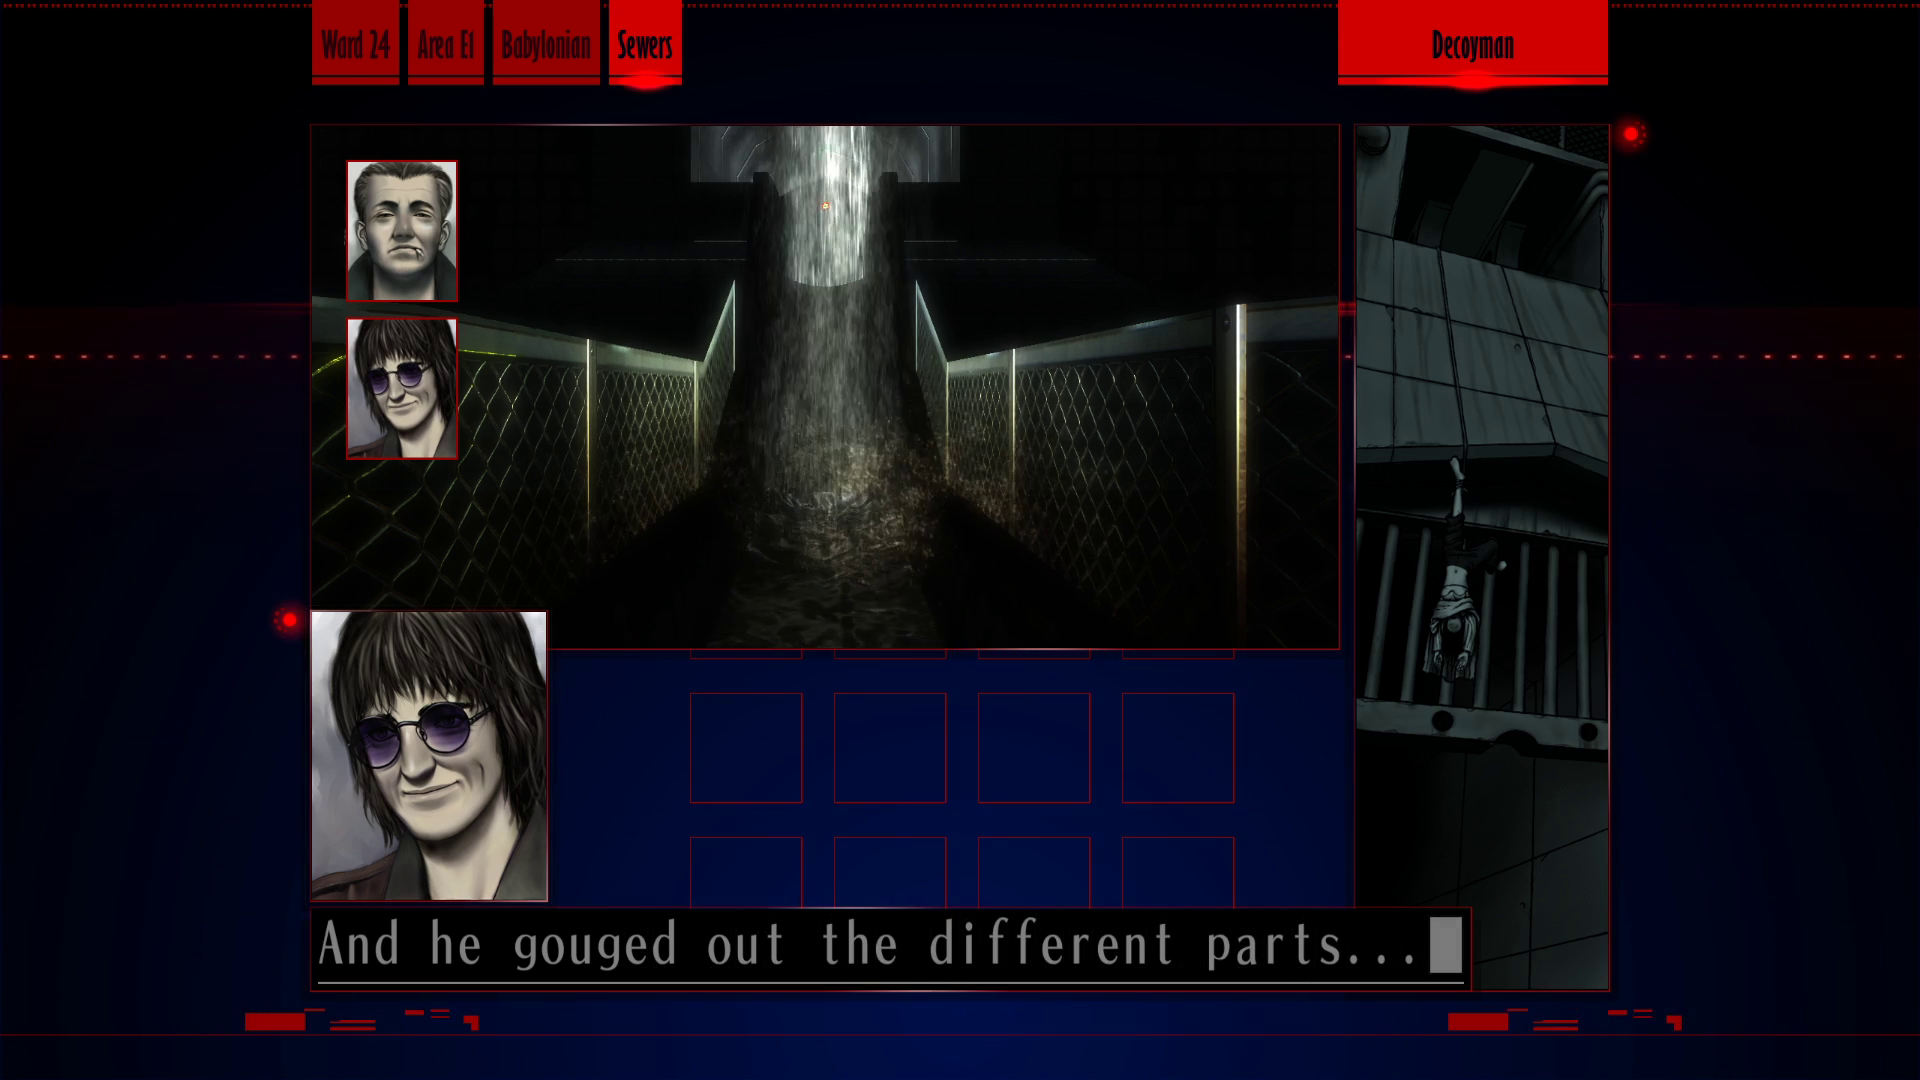 Screenshot from "Decoyman." One window shows the storm drain. Another shows an illustration of Yuka Kawai's corpse dangling upside down from her ankle. Morikawa says "And he gouged out the different parts..."